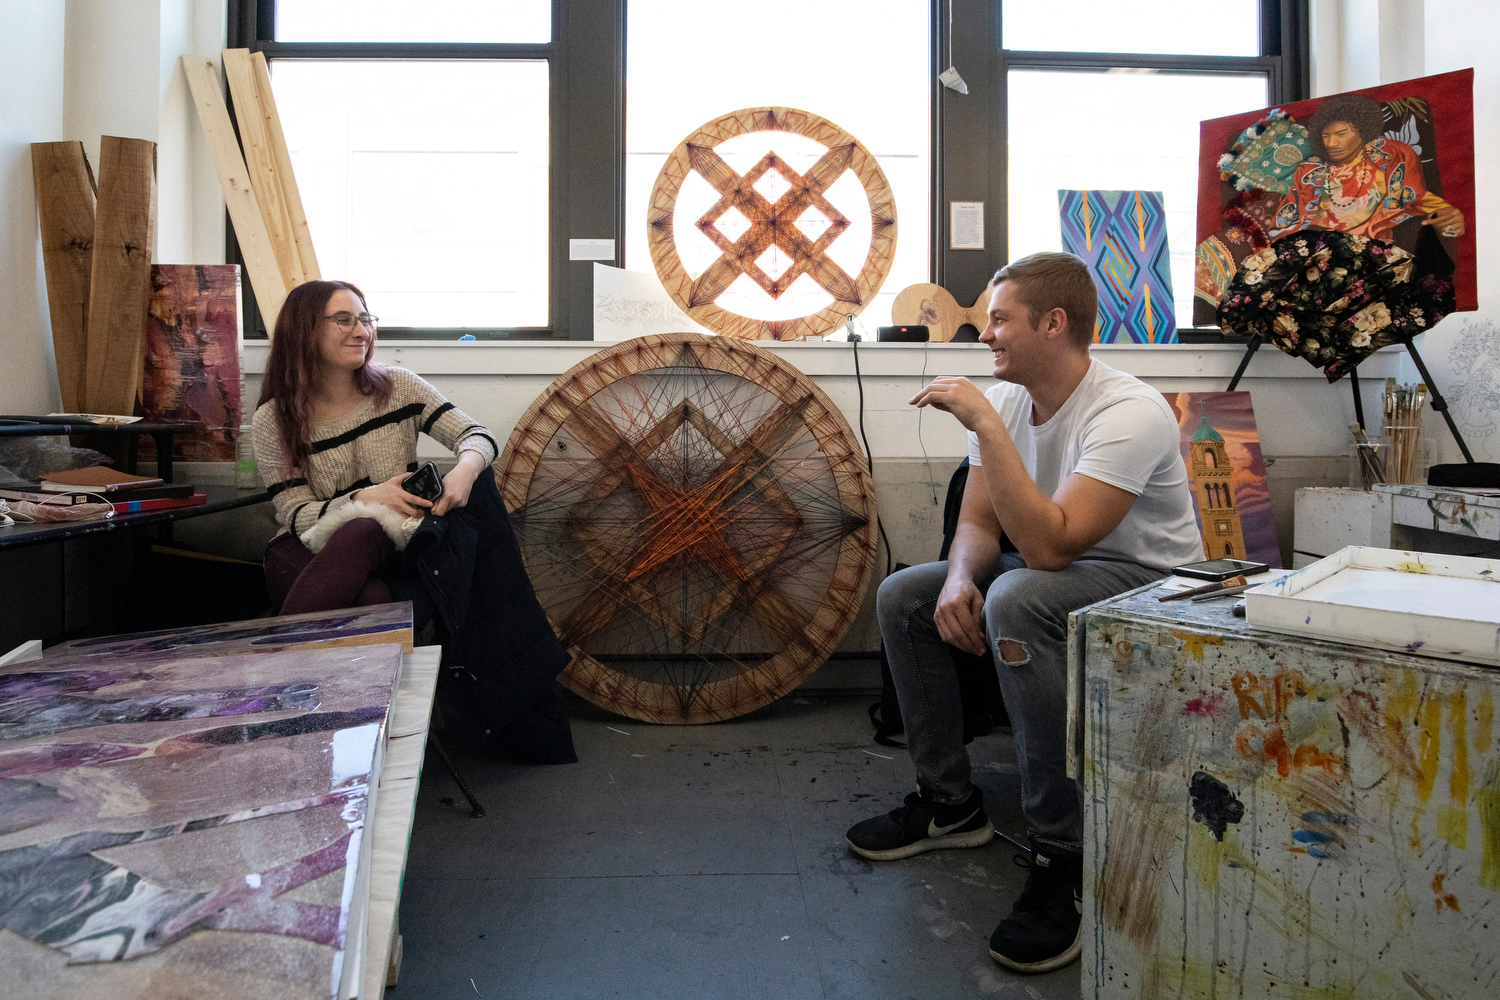 Alicia Meyer (CADA '20) and Josiah David (CADA '20) chat in the BFA thesis studio in Art and Design Hall as they wait for one-on-one studio visits from professors during their thesis course.